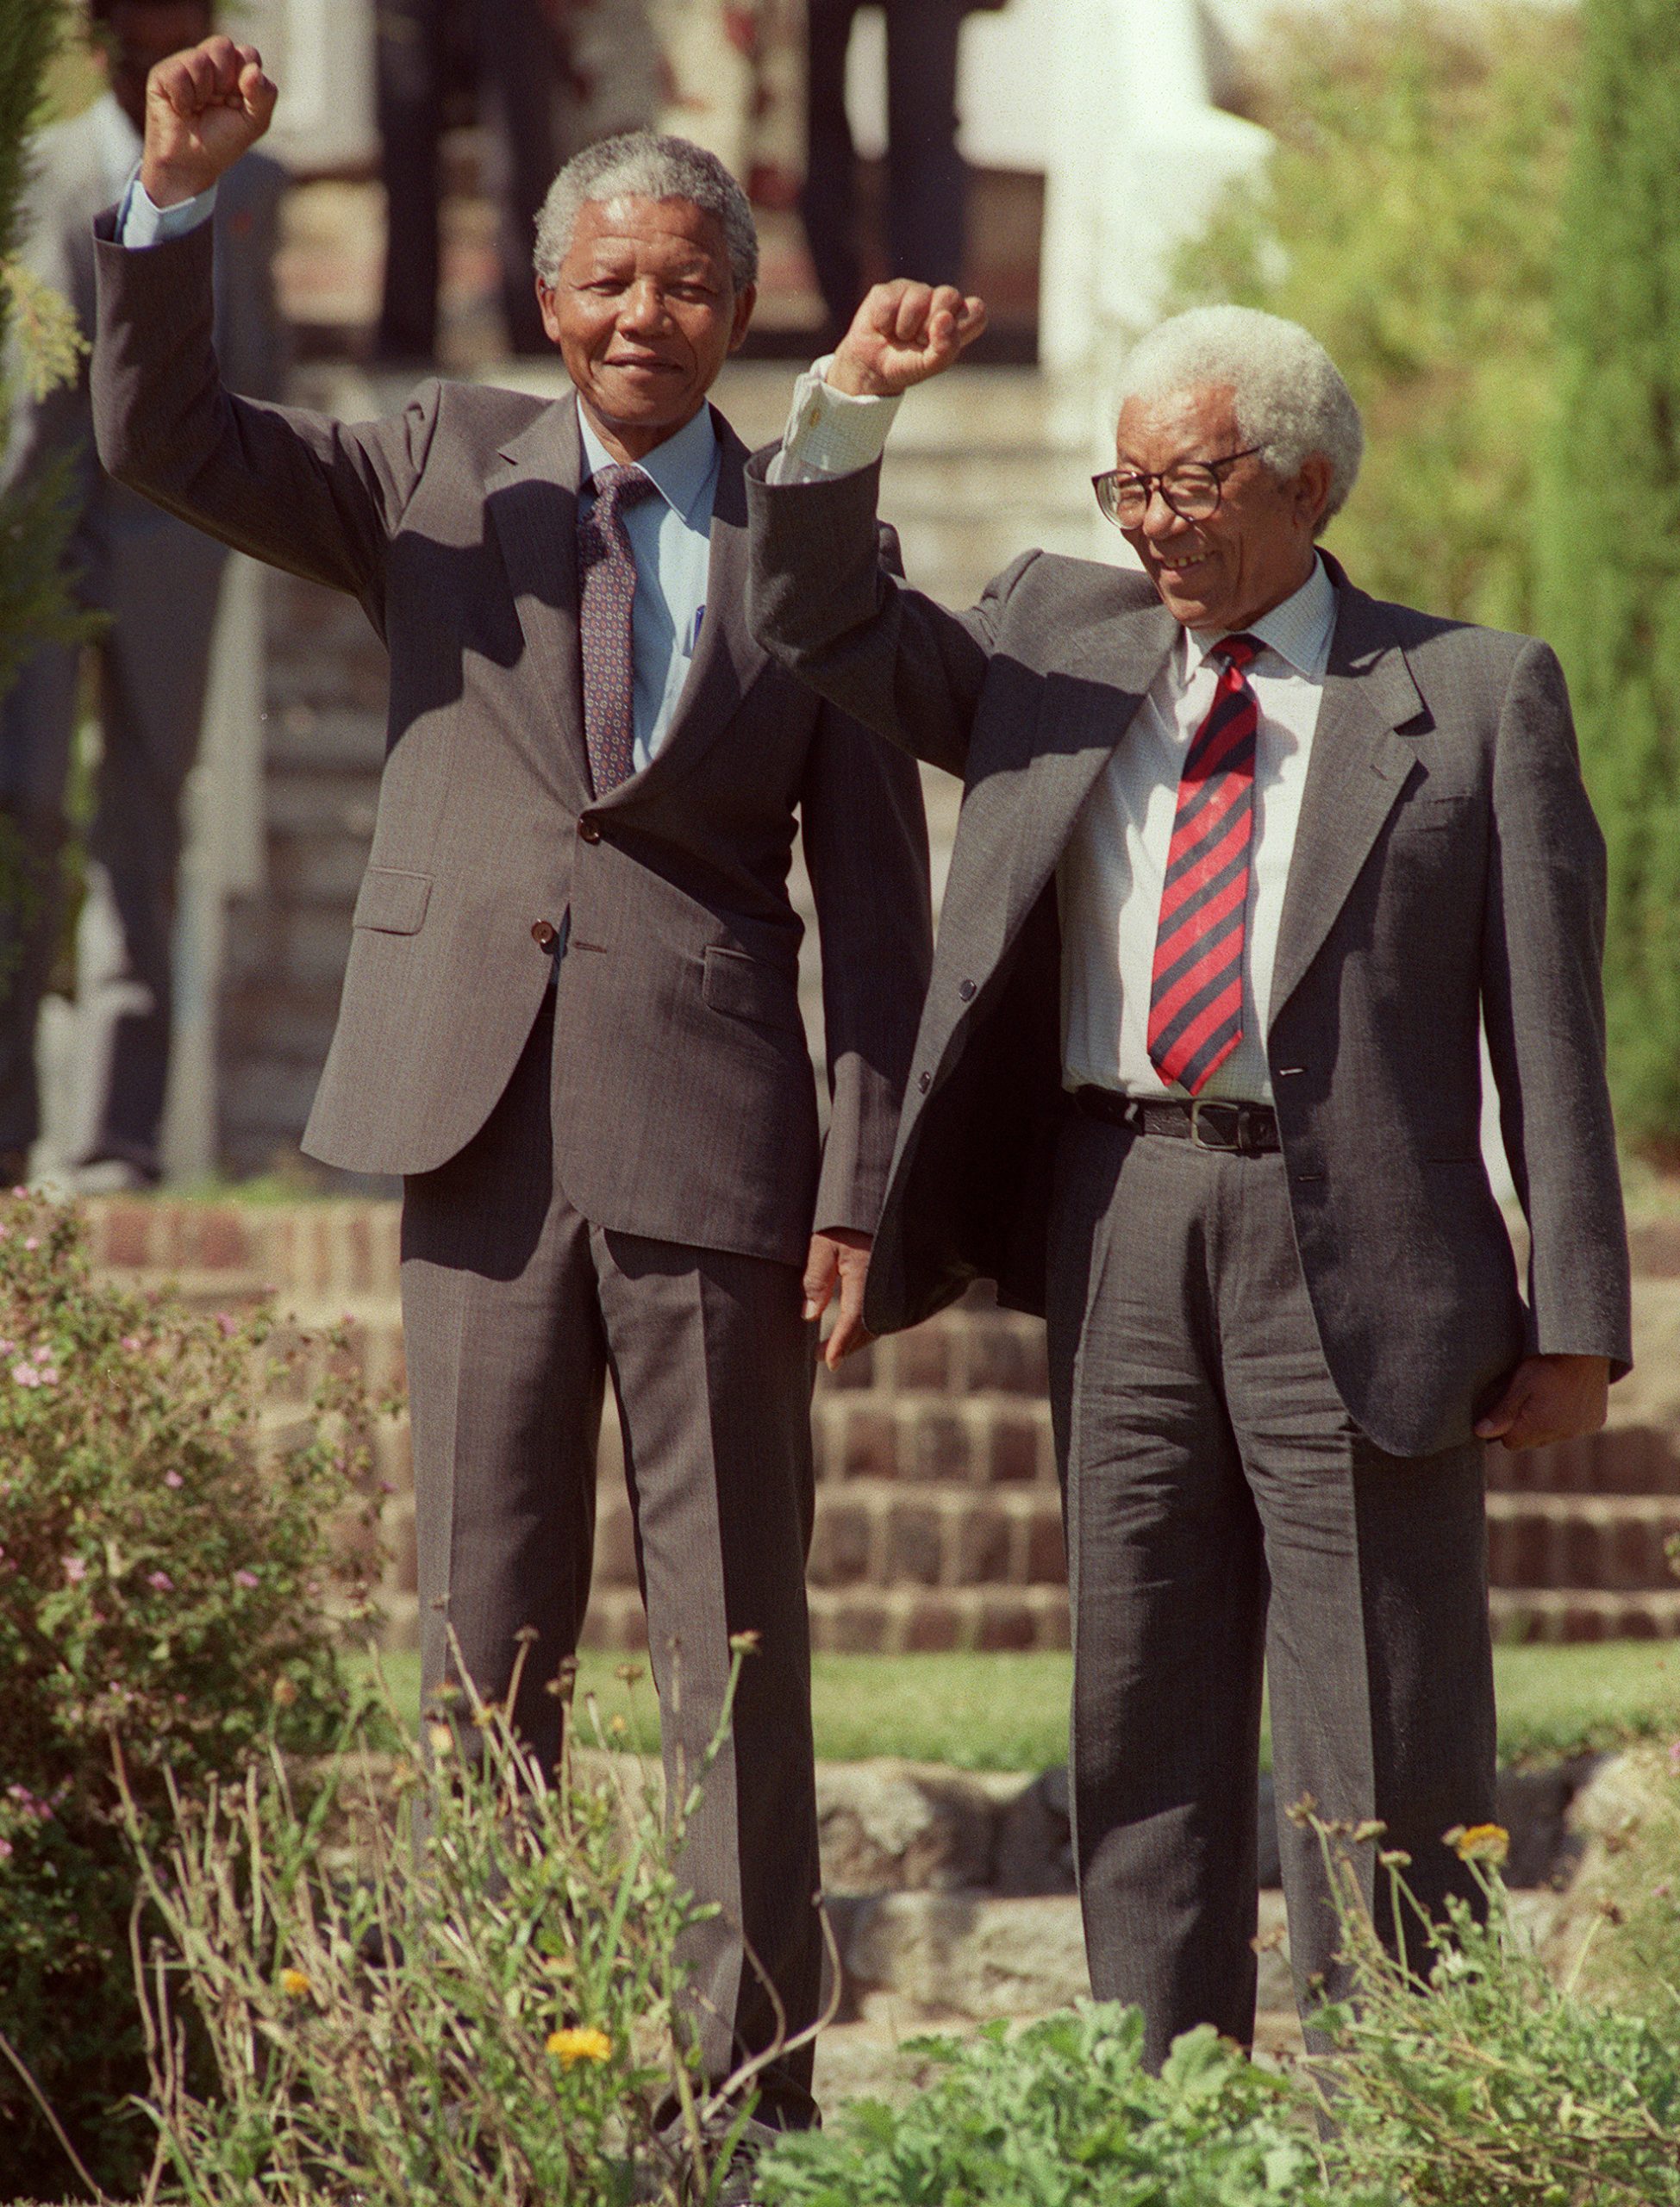 WALTER SISULU (1912-2003) - A Key Leader in The African National Congress (ANC), And Confidant and Mentor to Nelson Mandela - African Leaders Magazine 